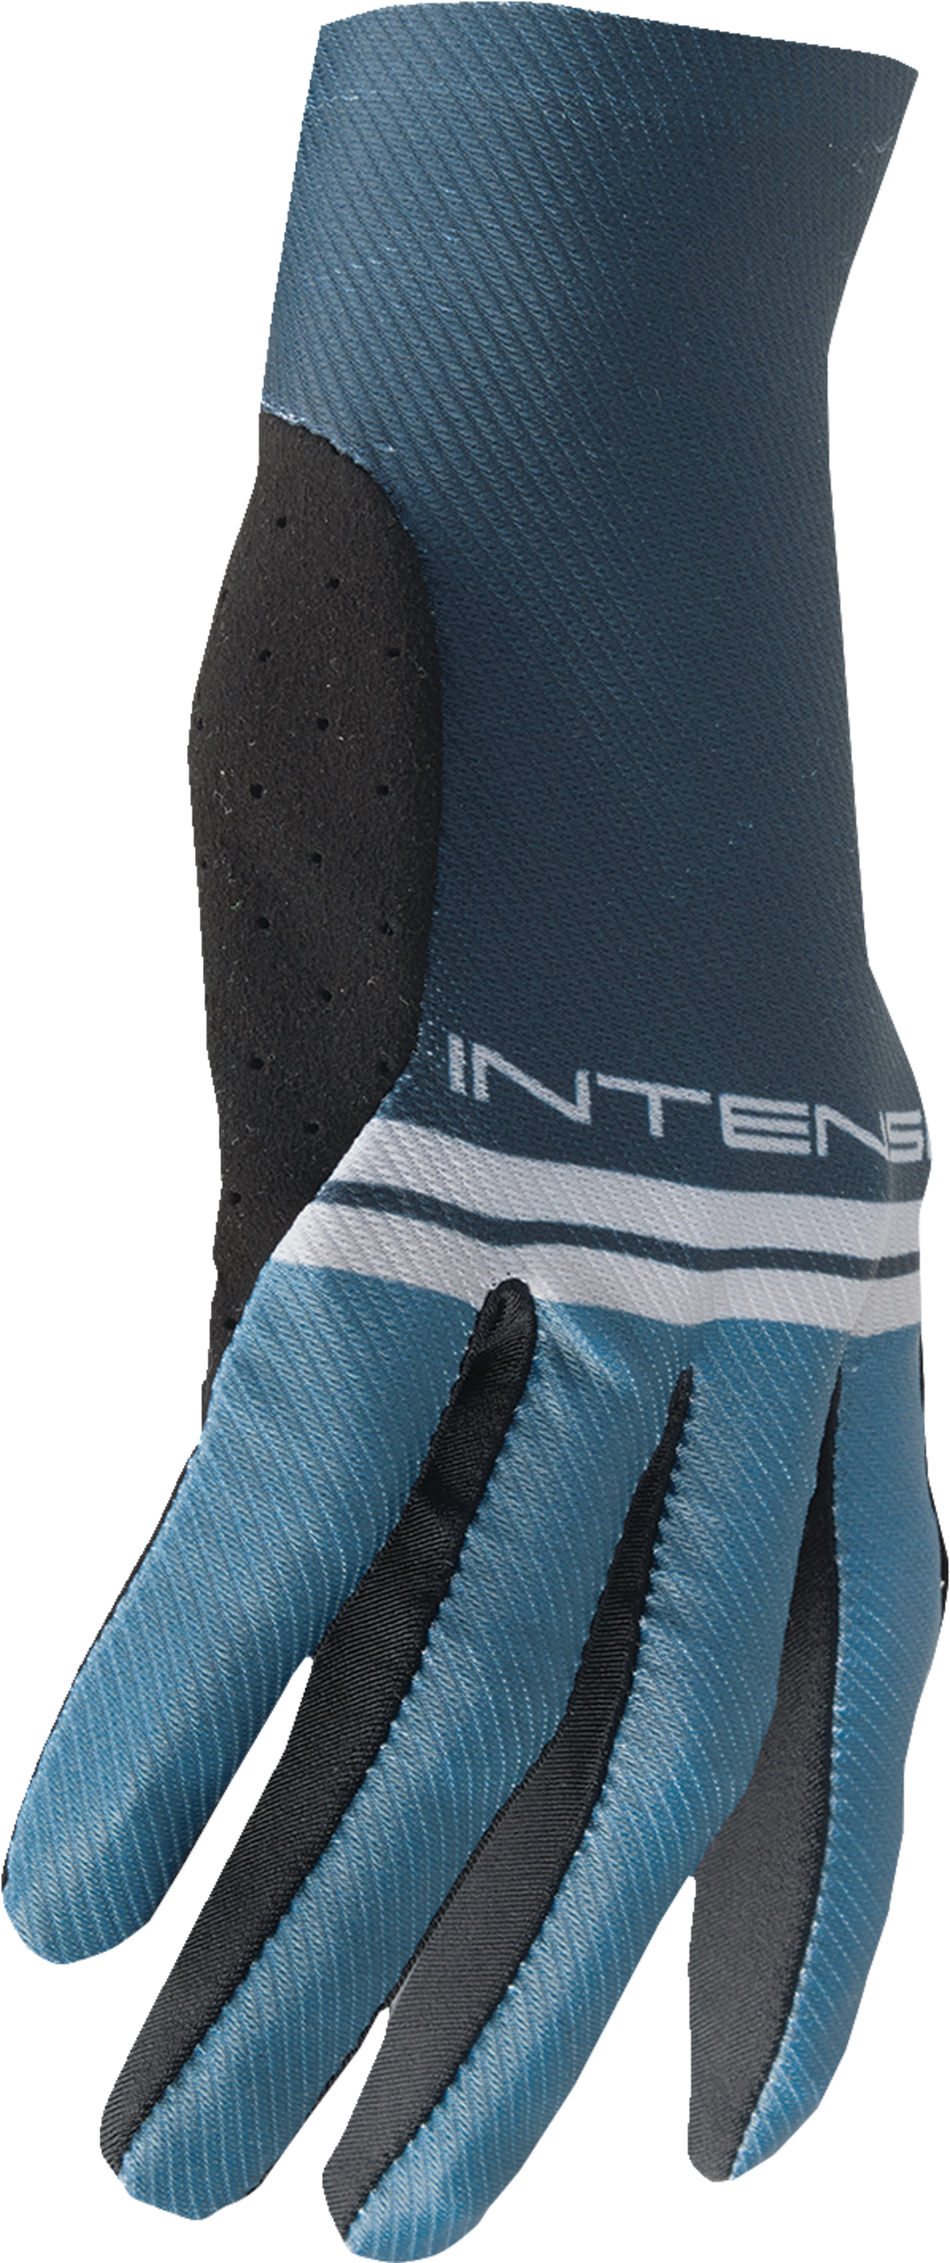 THOR Intense Assist Censis Gloves - Teal/Midnight - XS 3360-0235